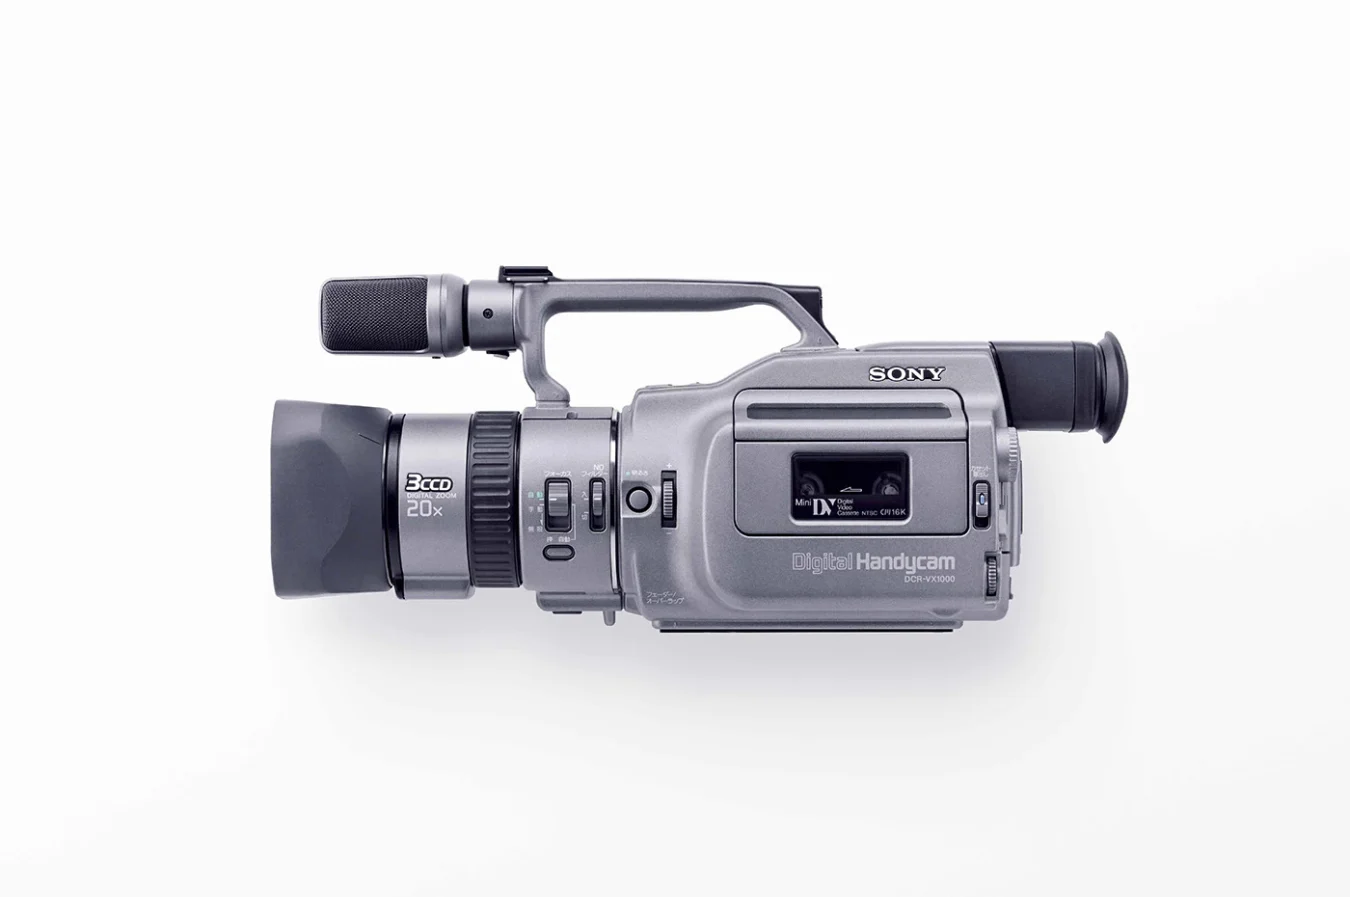 The first consumer digital video camera from Sony, the VX1000 is pictured in a marketing shot.